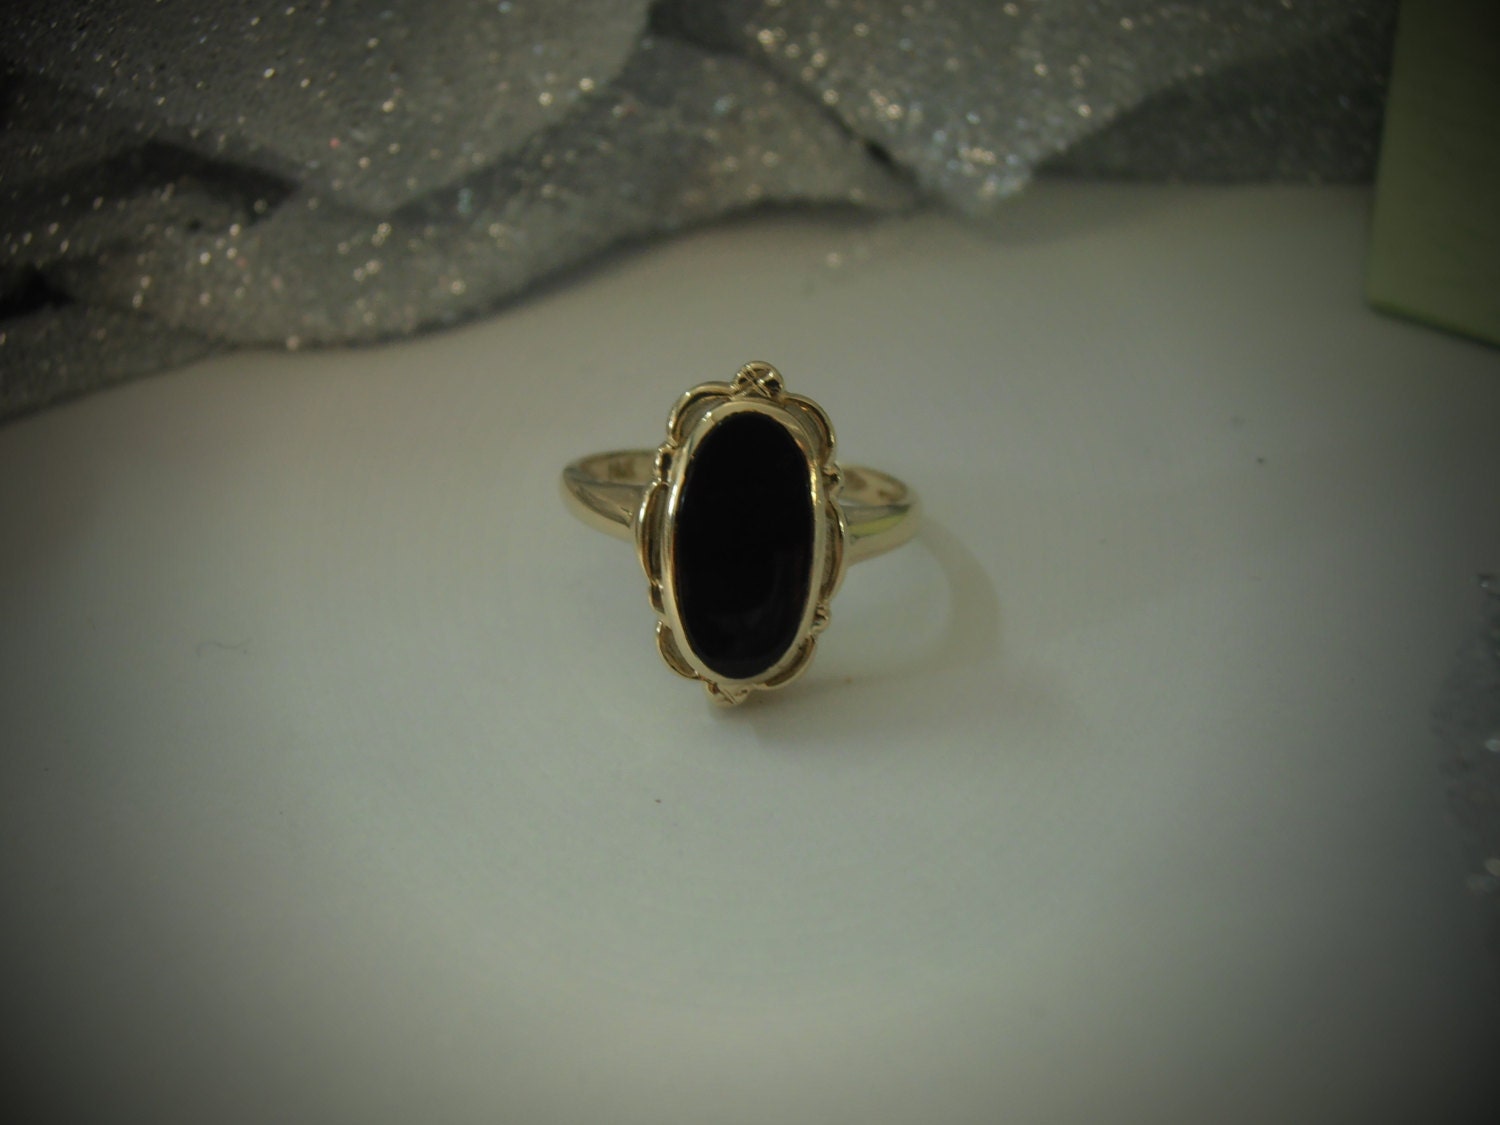 Ladies Black Onyx Ring by PPIJEWELRY on Etsy